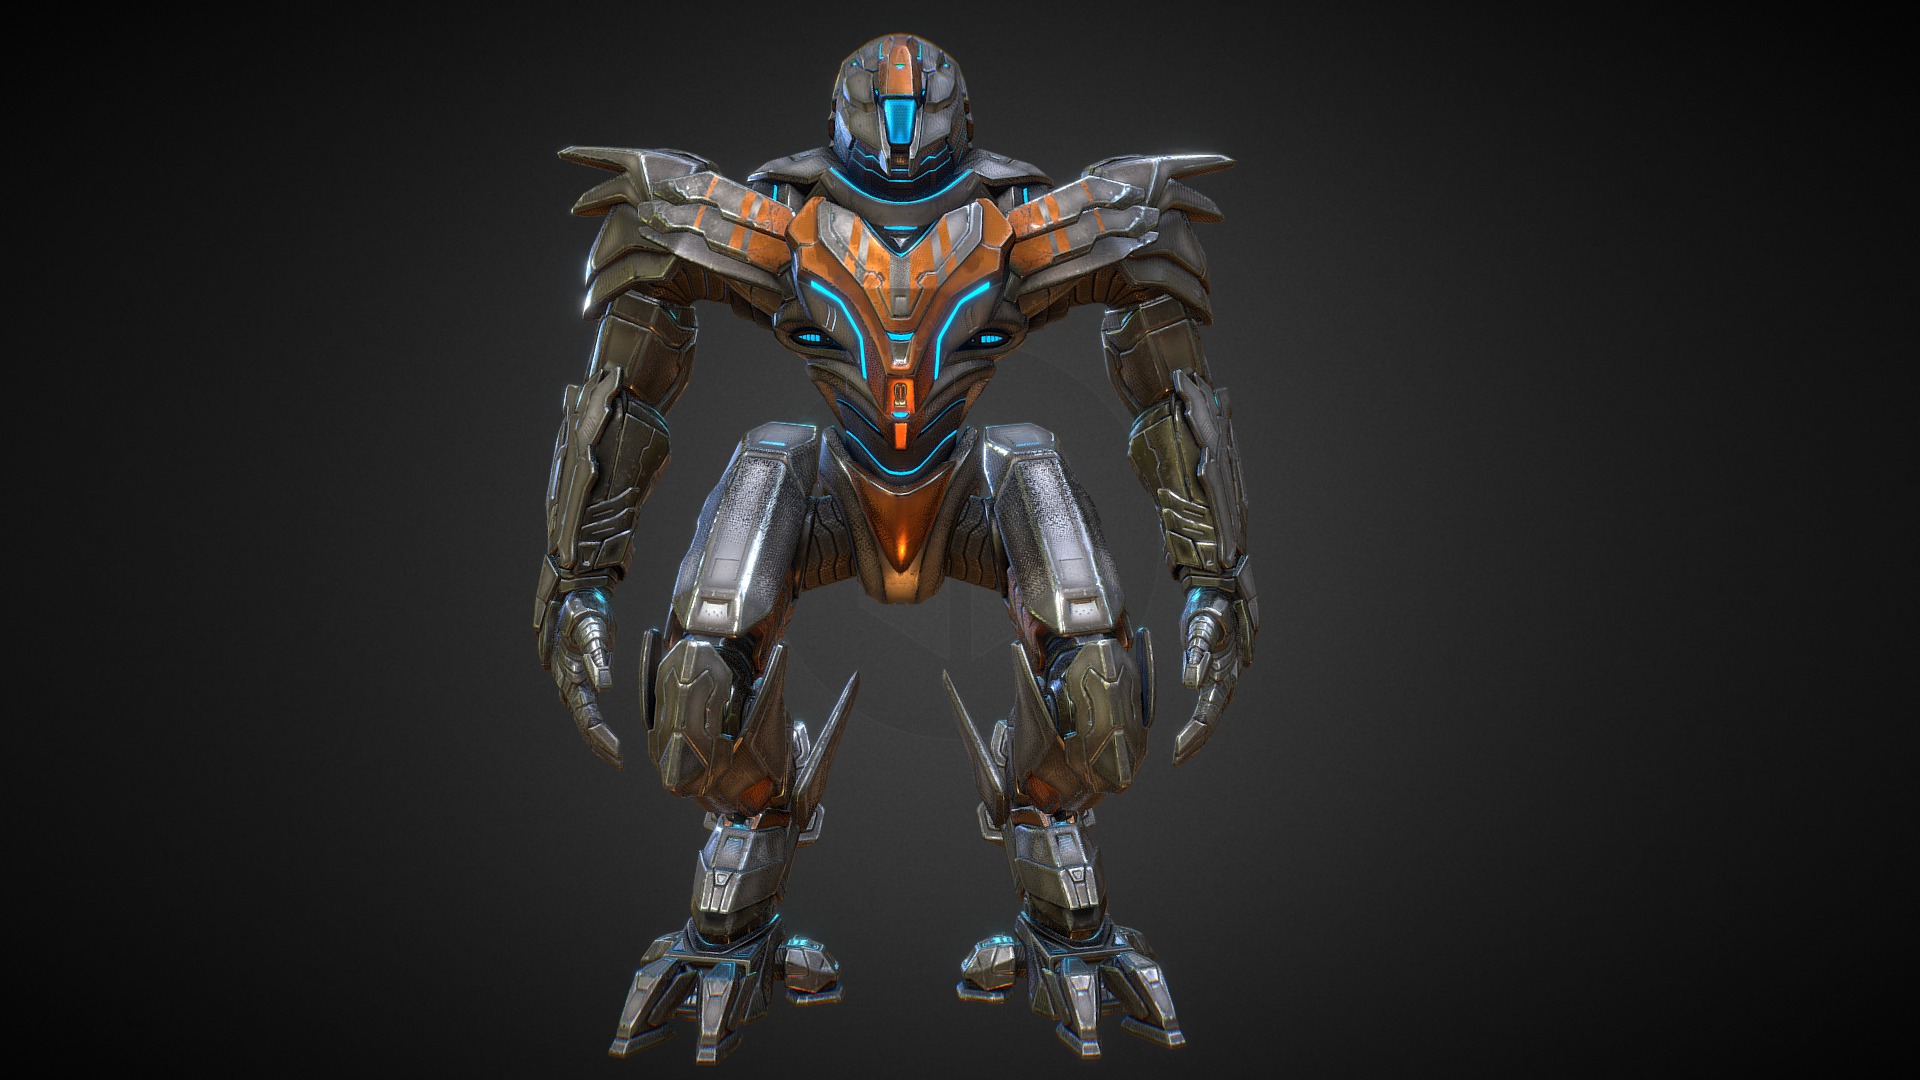 Here is the Mek I made for Ark: Extinction - 
https://store.steampowered.com/app/887380/ARK_Extinction__Expansion_Pack/
Modeled it in 3ds Max and textured in Substance Painter 2018.

The Mek is one of the Creatures in the Extinction DLC of ARK: Survival Evolved.  Meks are deployable Tek robots that can be piloted by survivors. Armed with a Tek Rifle and Tek Sword, they can deal a lot of damage against the target 3d model